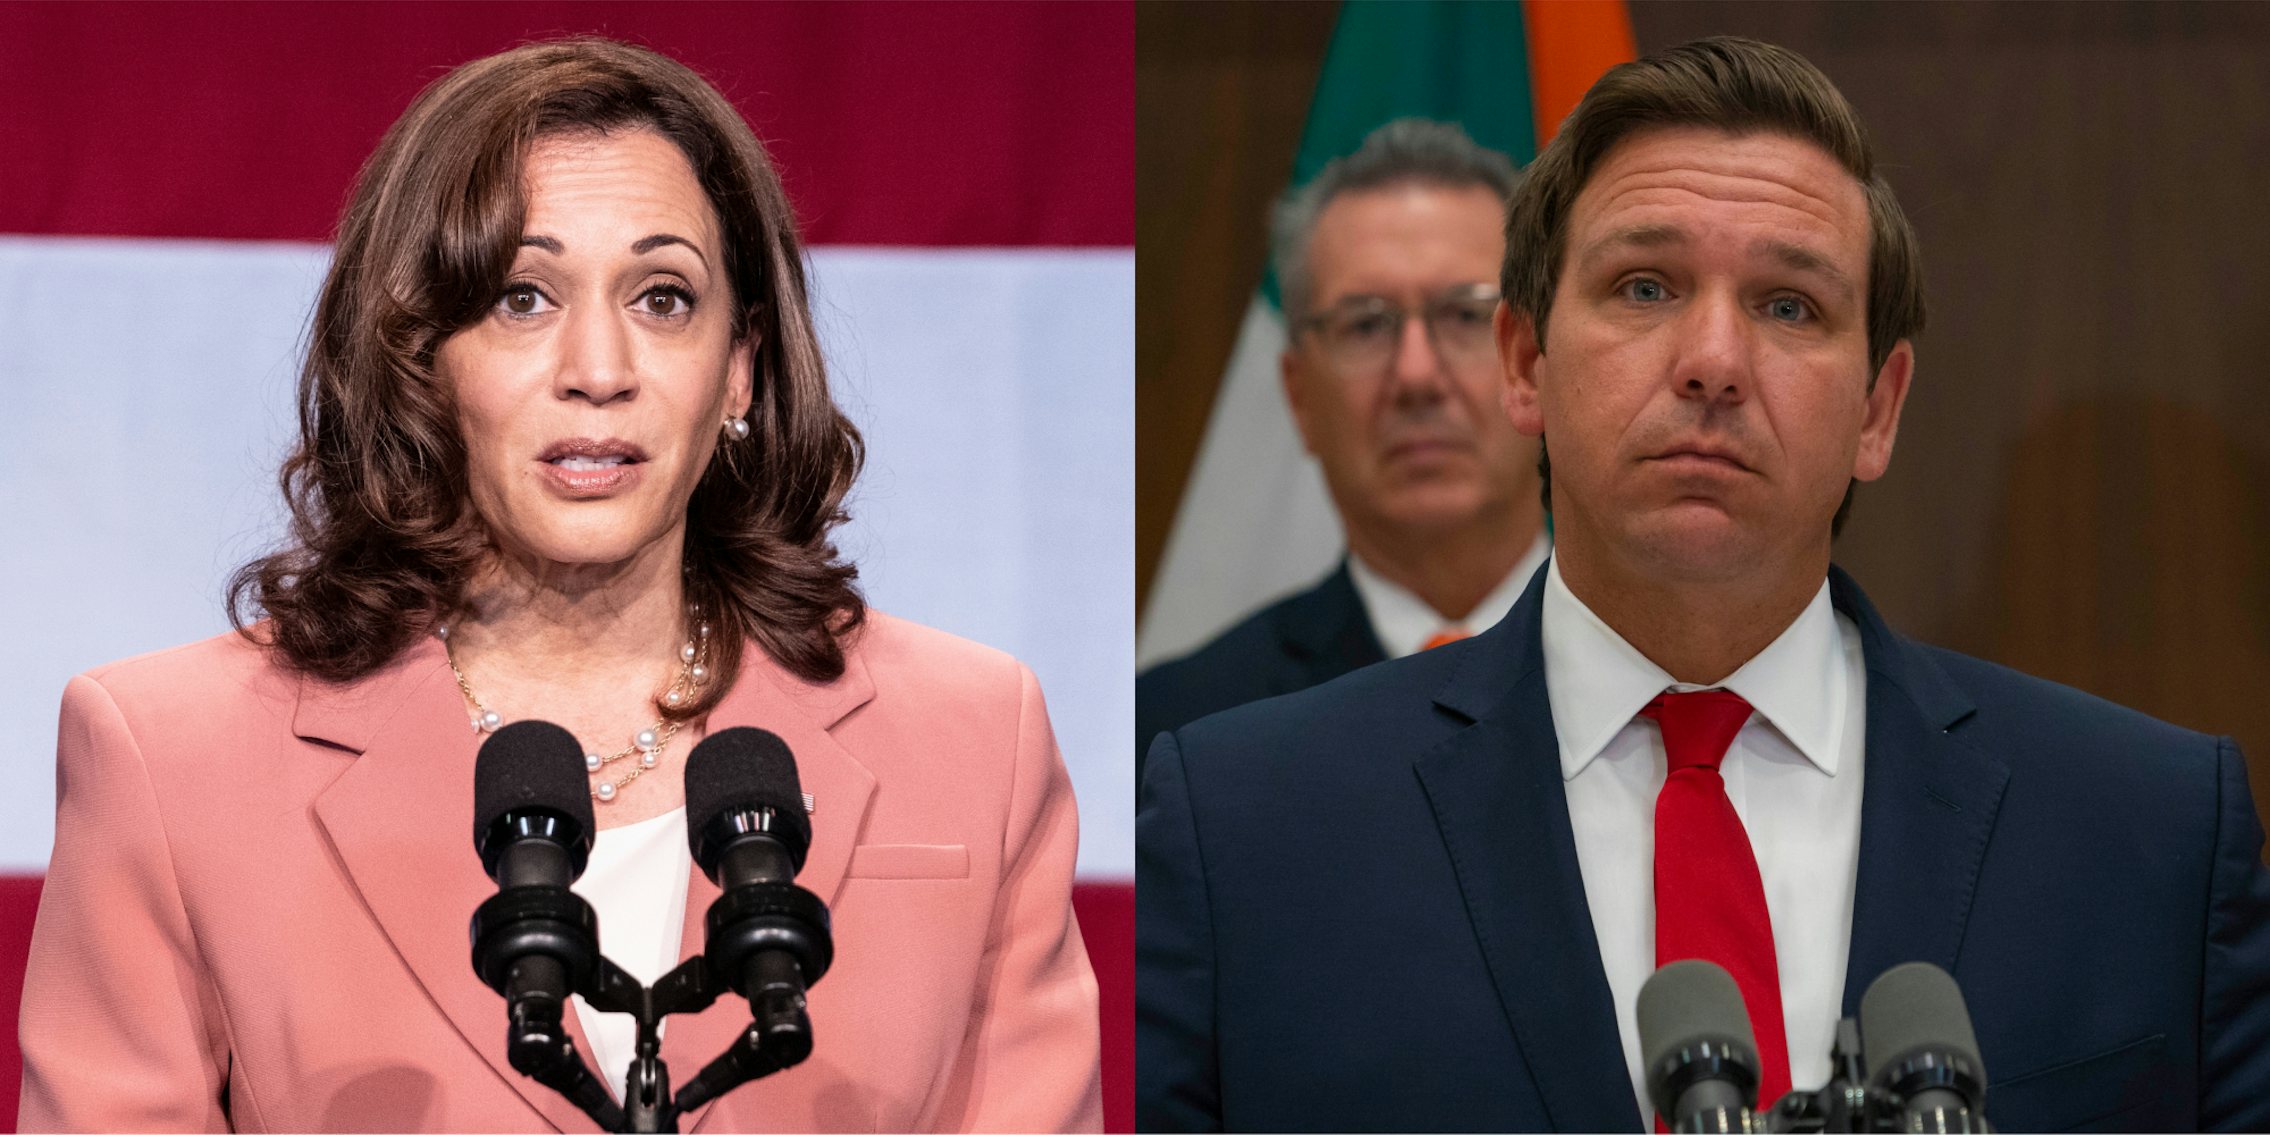 Kamala Harris speaking into microphones in front of red and white background (l) Ron DeSantis speaking into microphones in front of wood wall and flag (r)